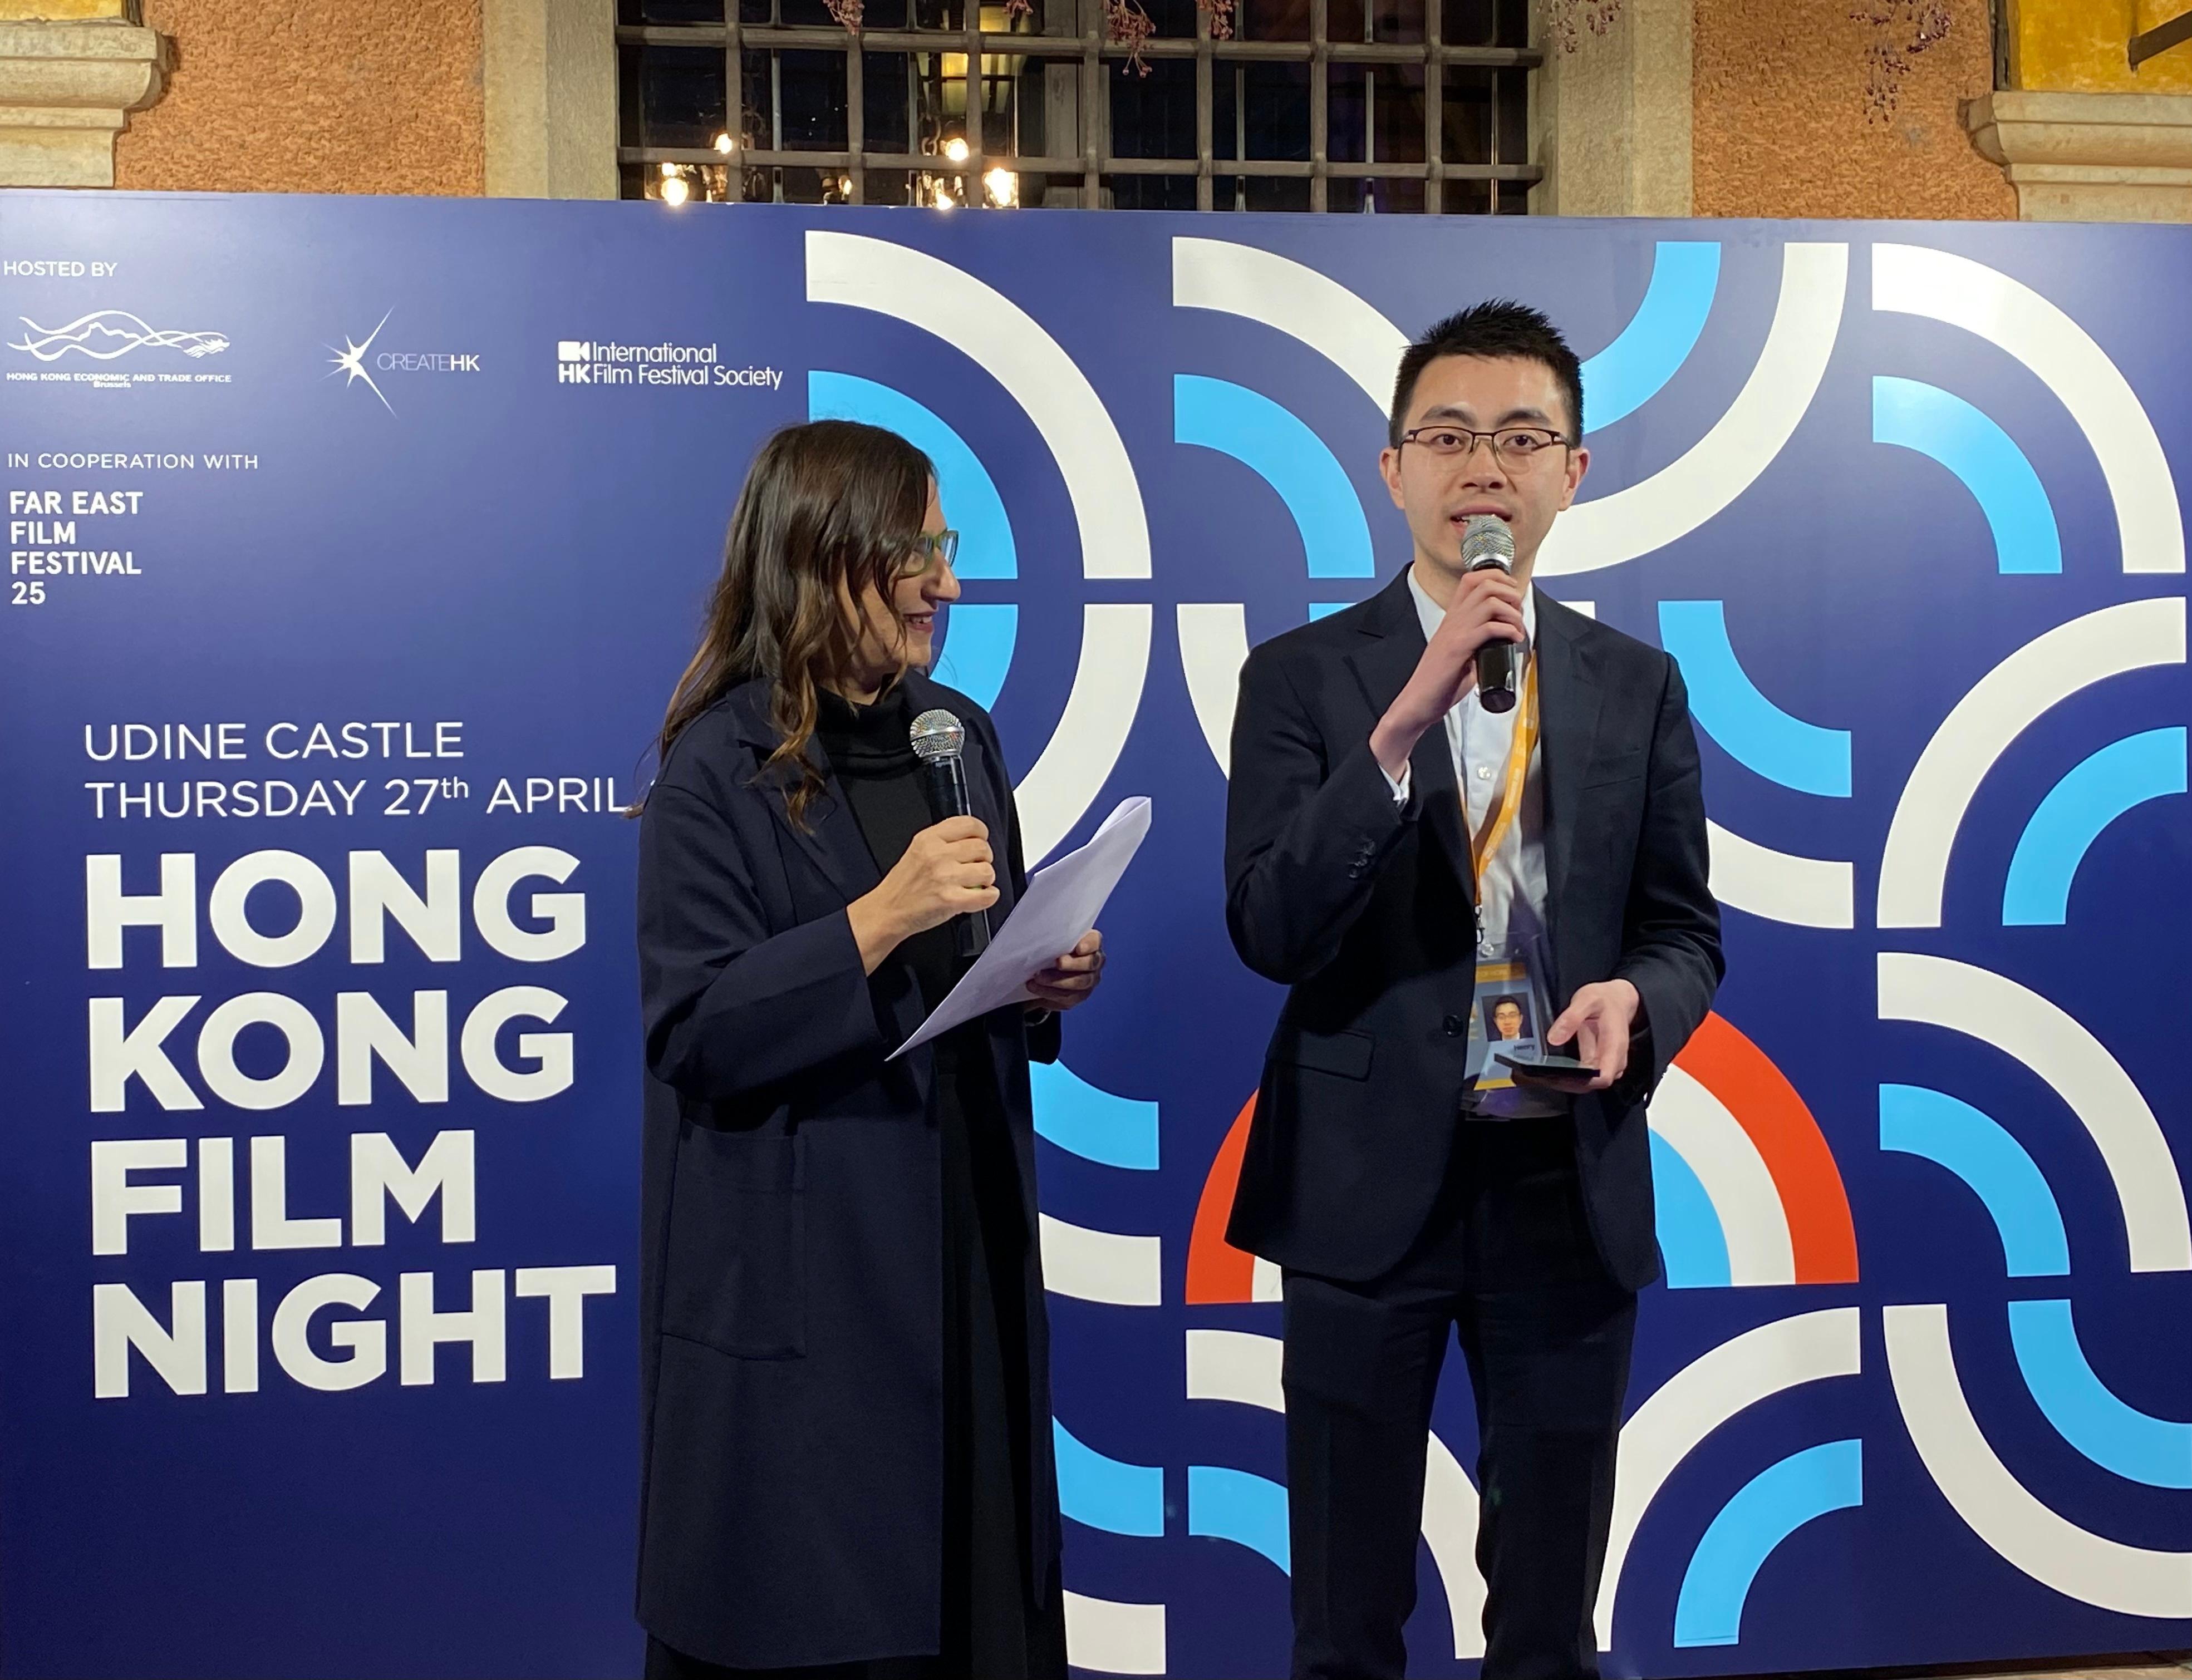 Deputy Representative of the Hong Kong Economic and Trade Office in Brussels Mr Henry Tsoi (right) addresses guests from the international cinema and cultural scene at the networking reception of the Hong Kong Film Night held in Udine, Italy, on April 27 (Udine time) during the 25th Far East Film Festival (FEFF).  Next to him is the President of the FEFF, Ms Sabrina Baracetti (left).